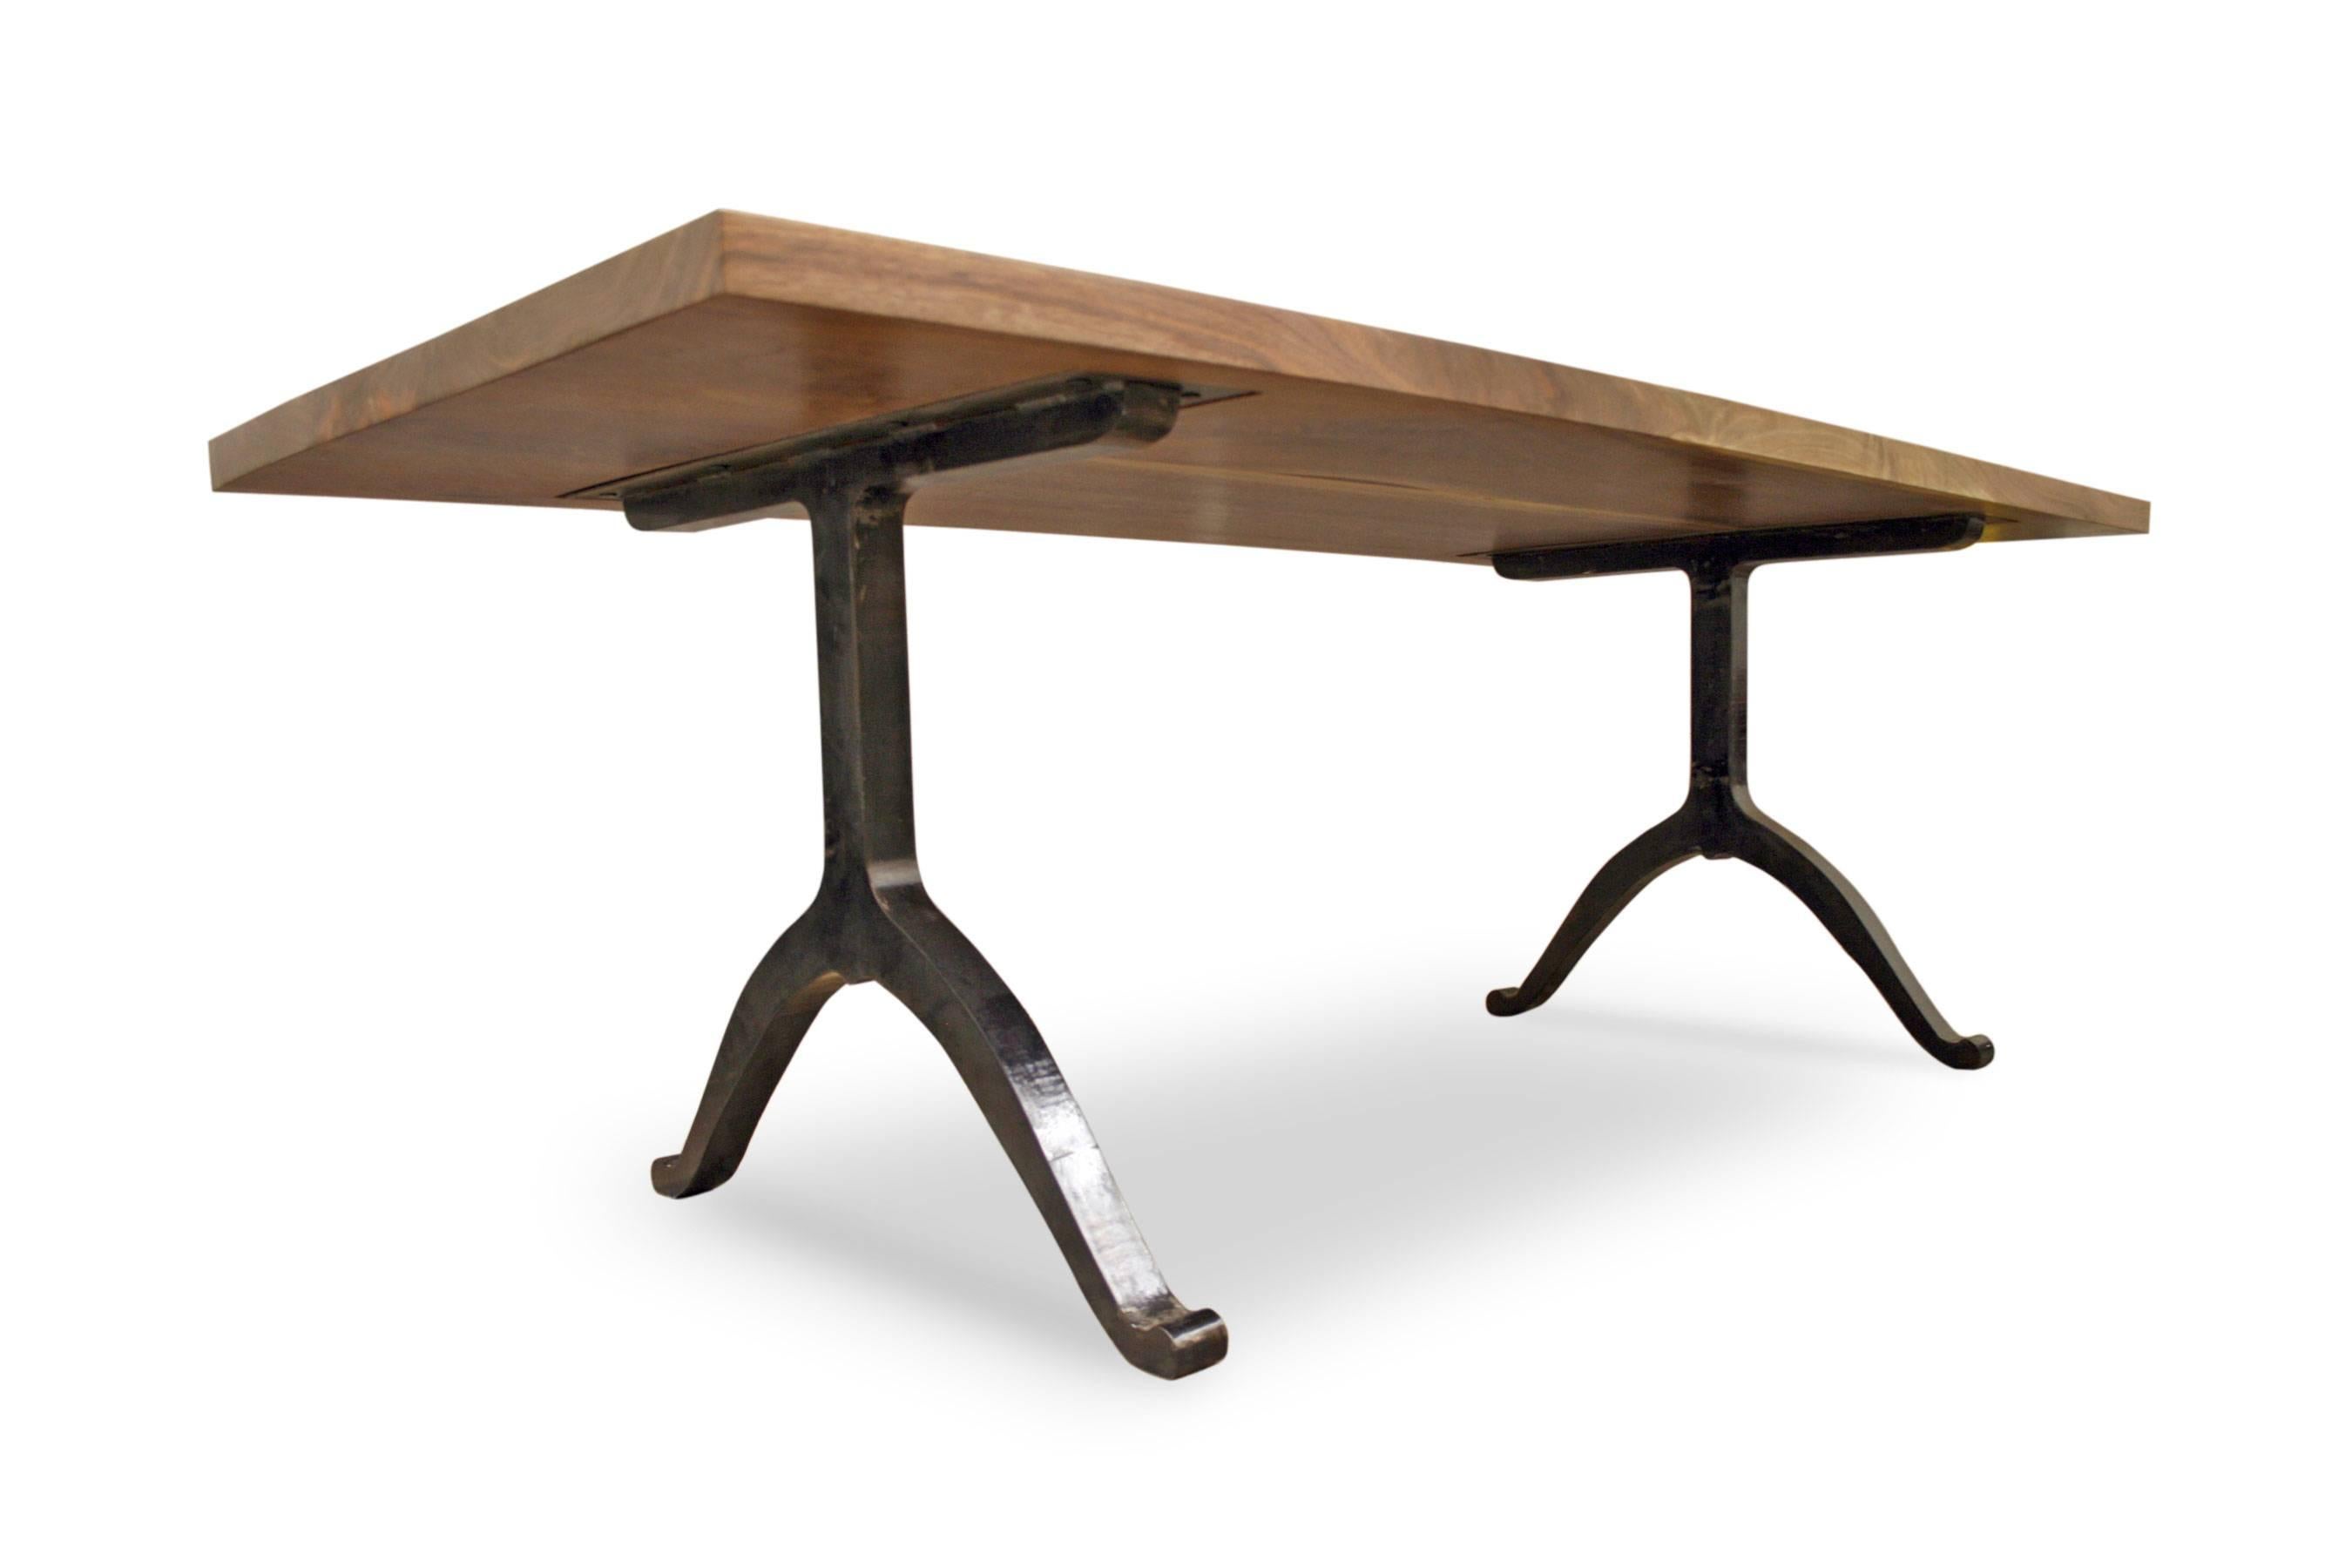 This table is constructed using local Pennsylvanian black walnut, with an almost invisible finish to show the natural color and beauty of the grain. Juxtaposed with our Wishbone steel leg system, the table has a unique statement: A harmony of two